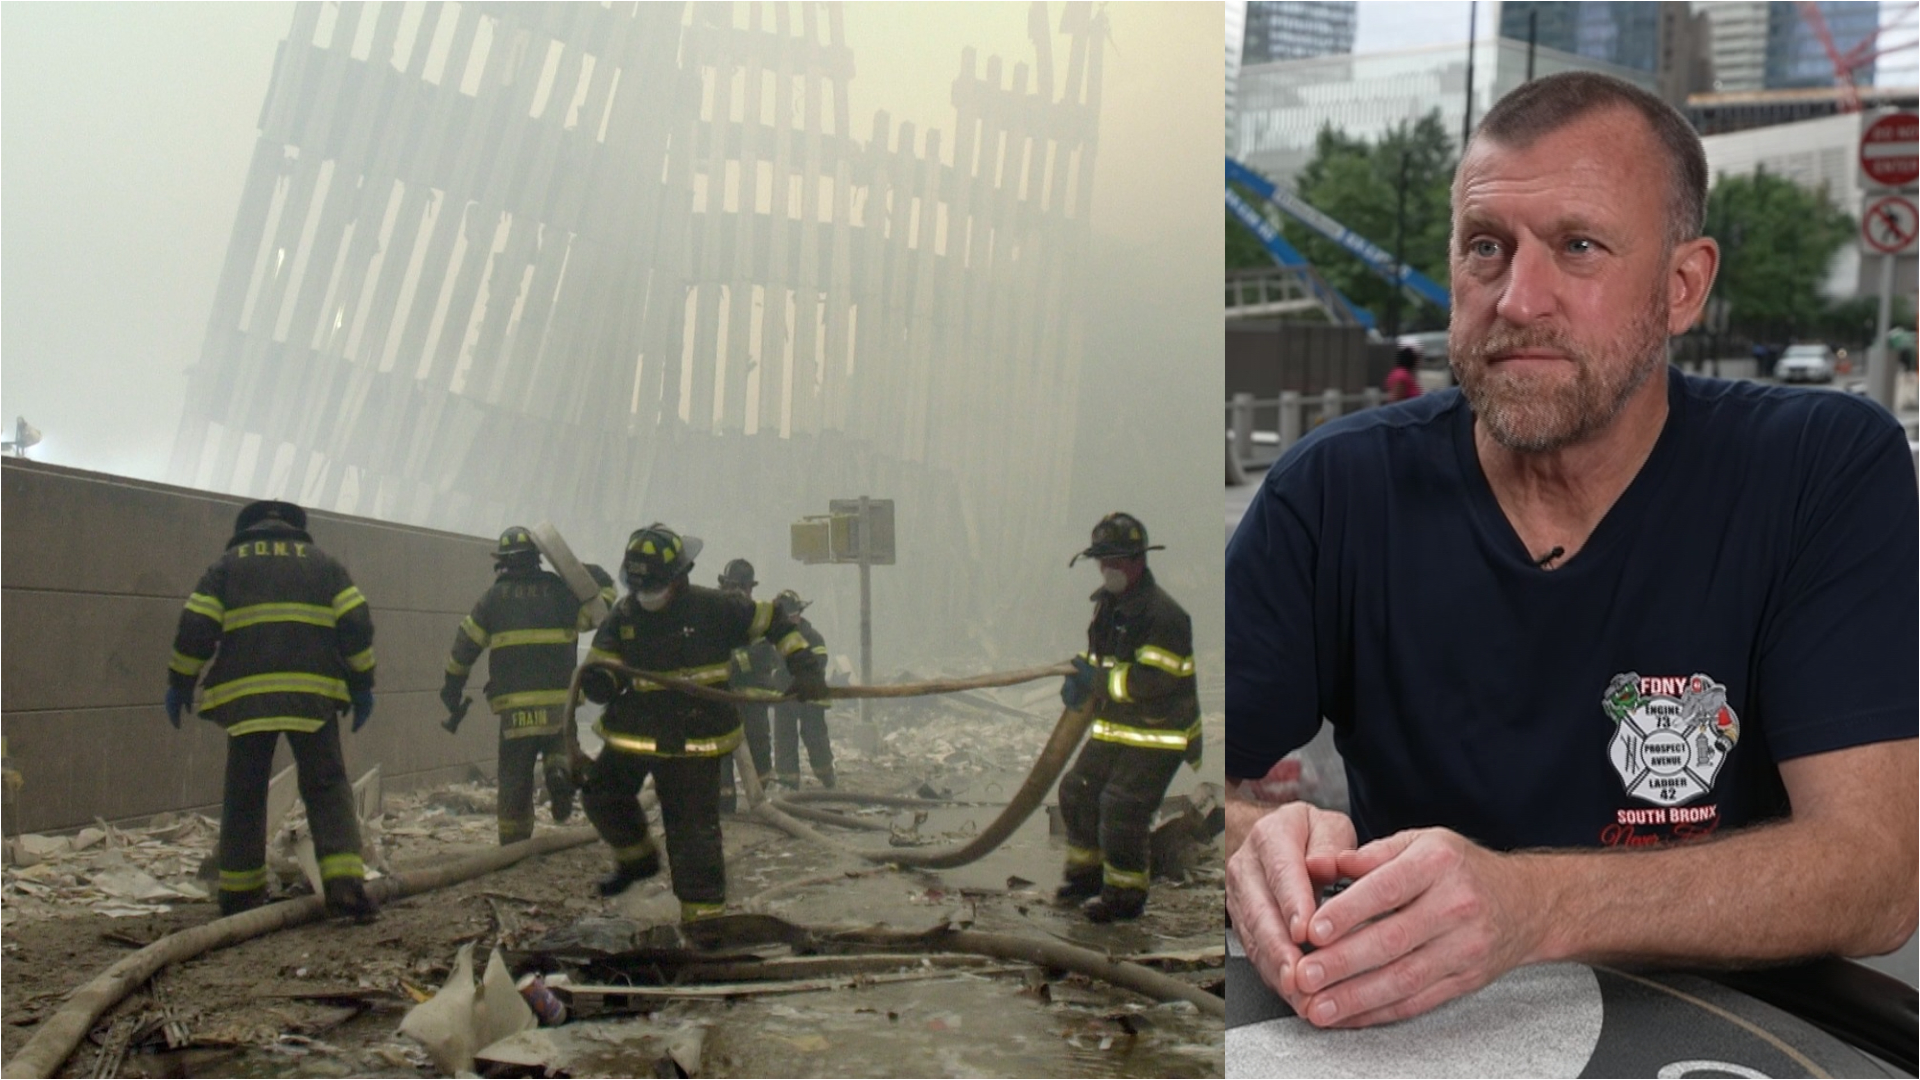 911 New York Firefighter Who Lost 100 Friends In Attack Says They